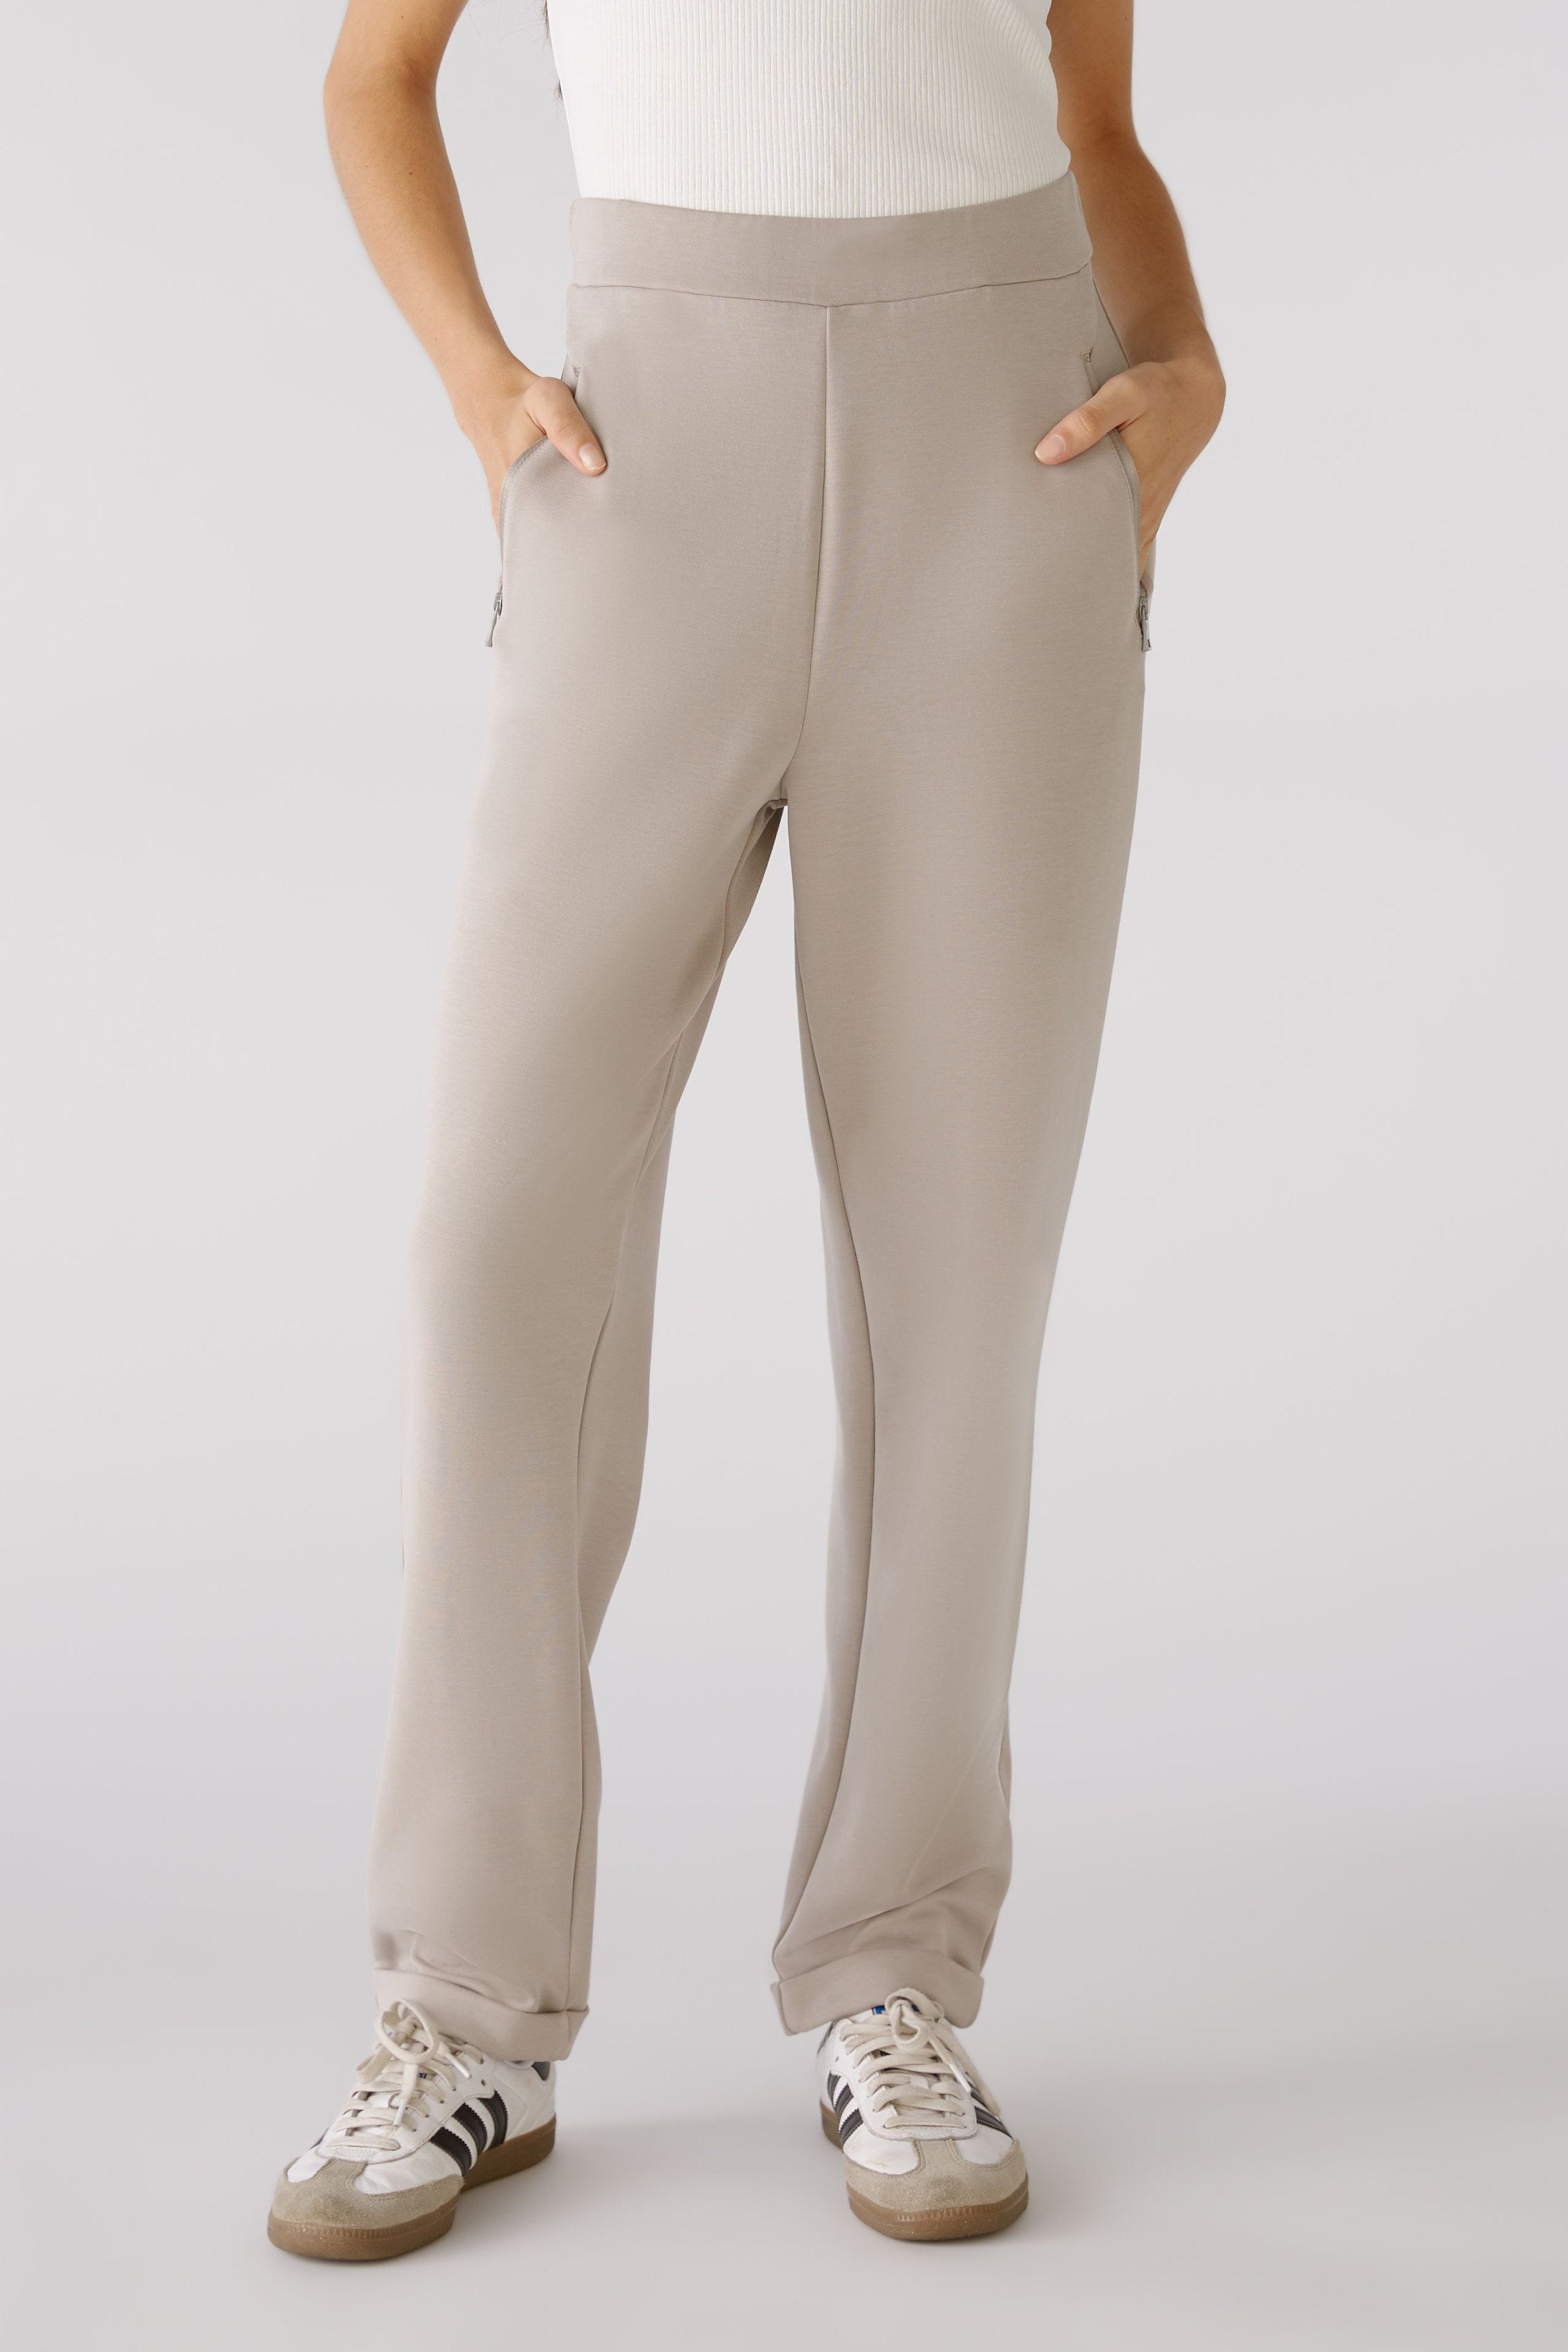 Jogger Style Trousers Made From Comfortable Jersey Quality_79867_8088_03